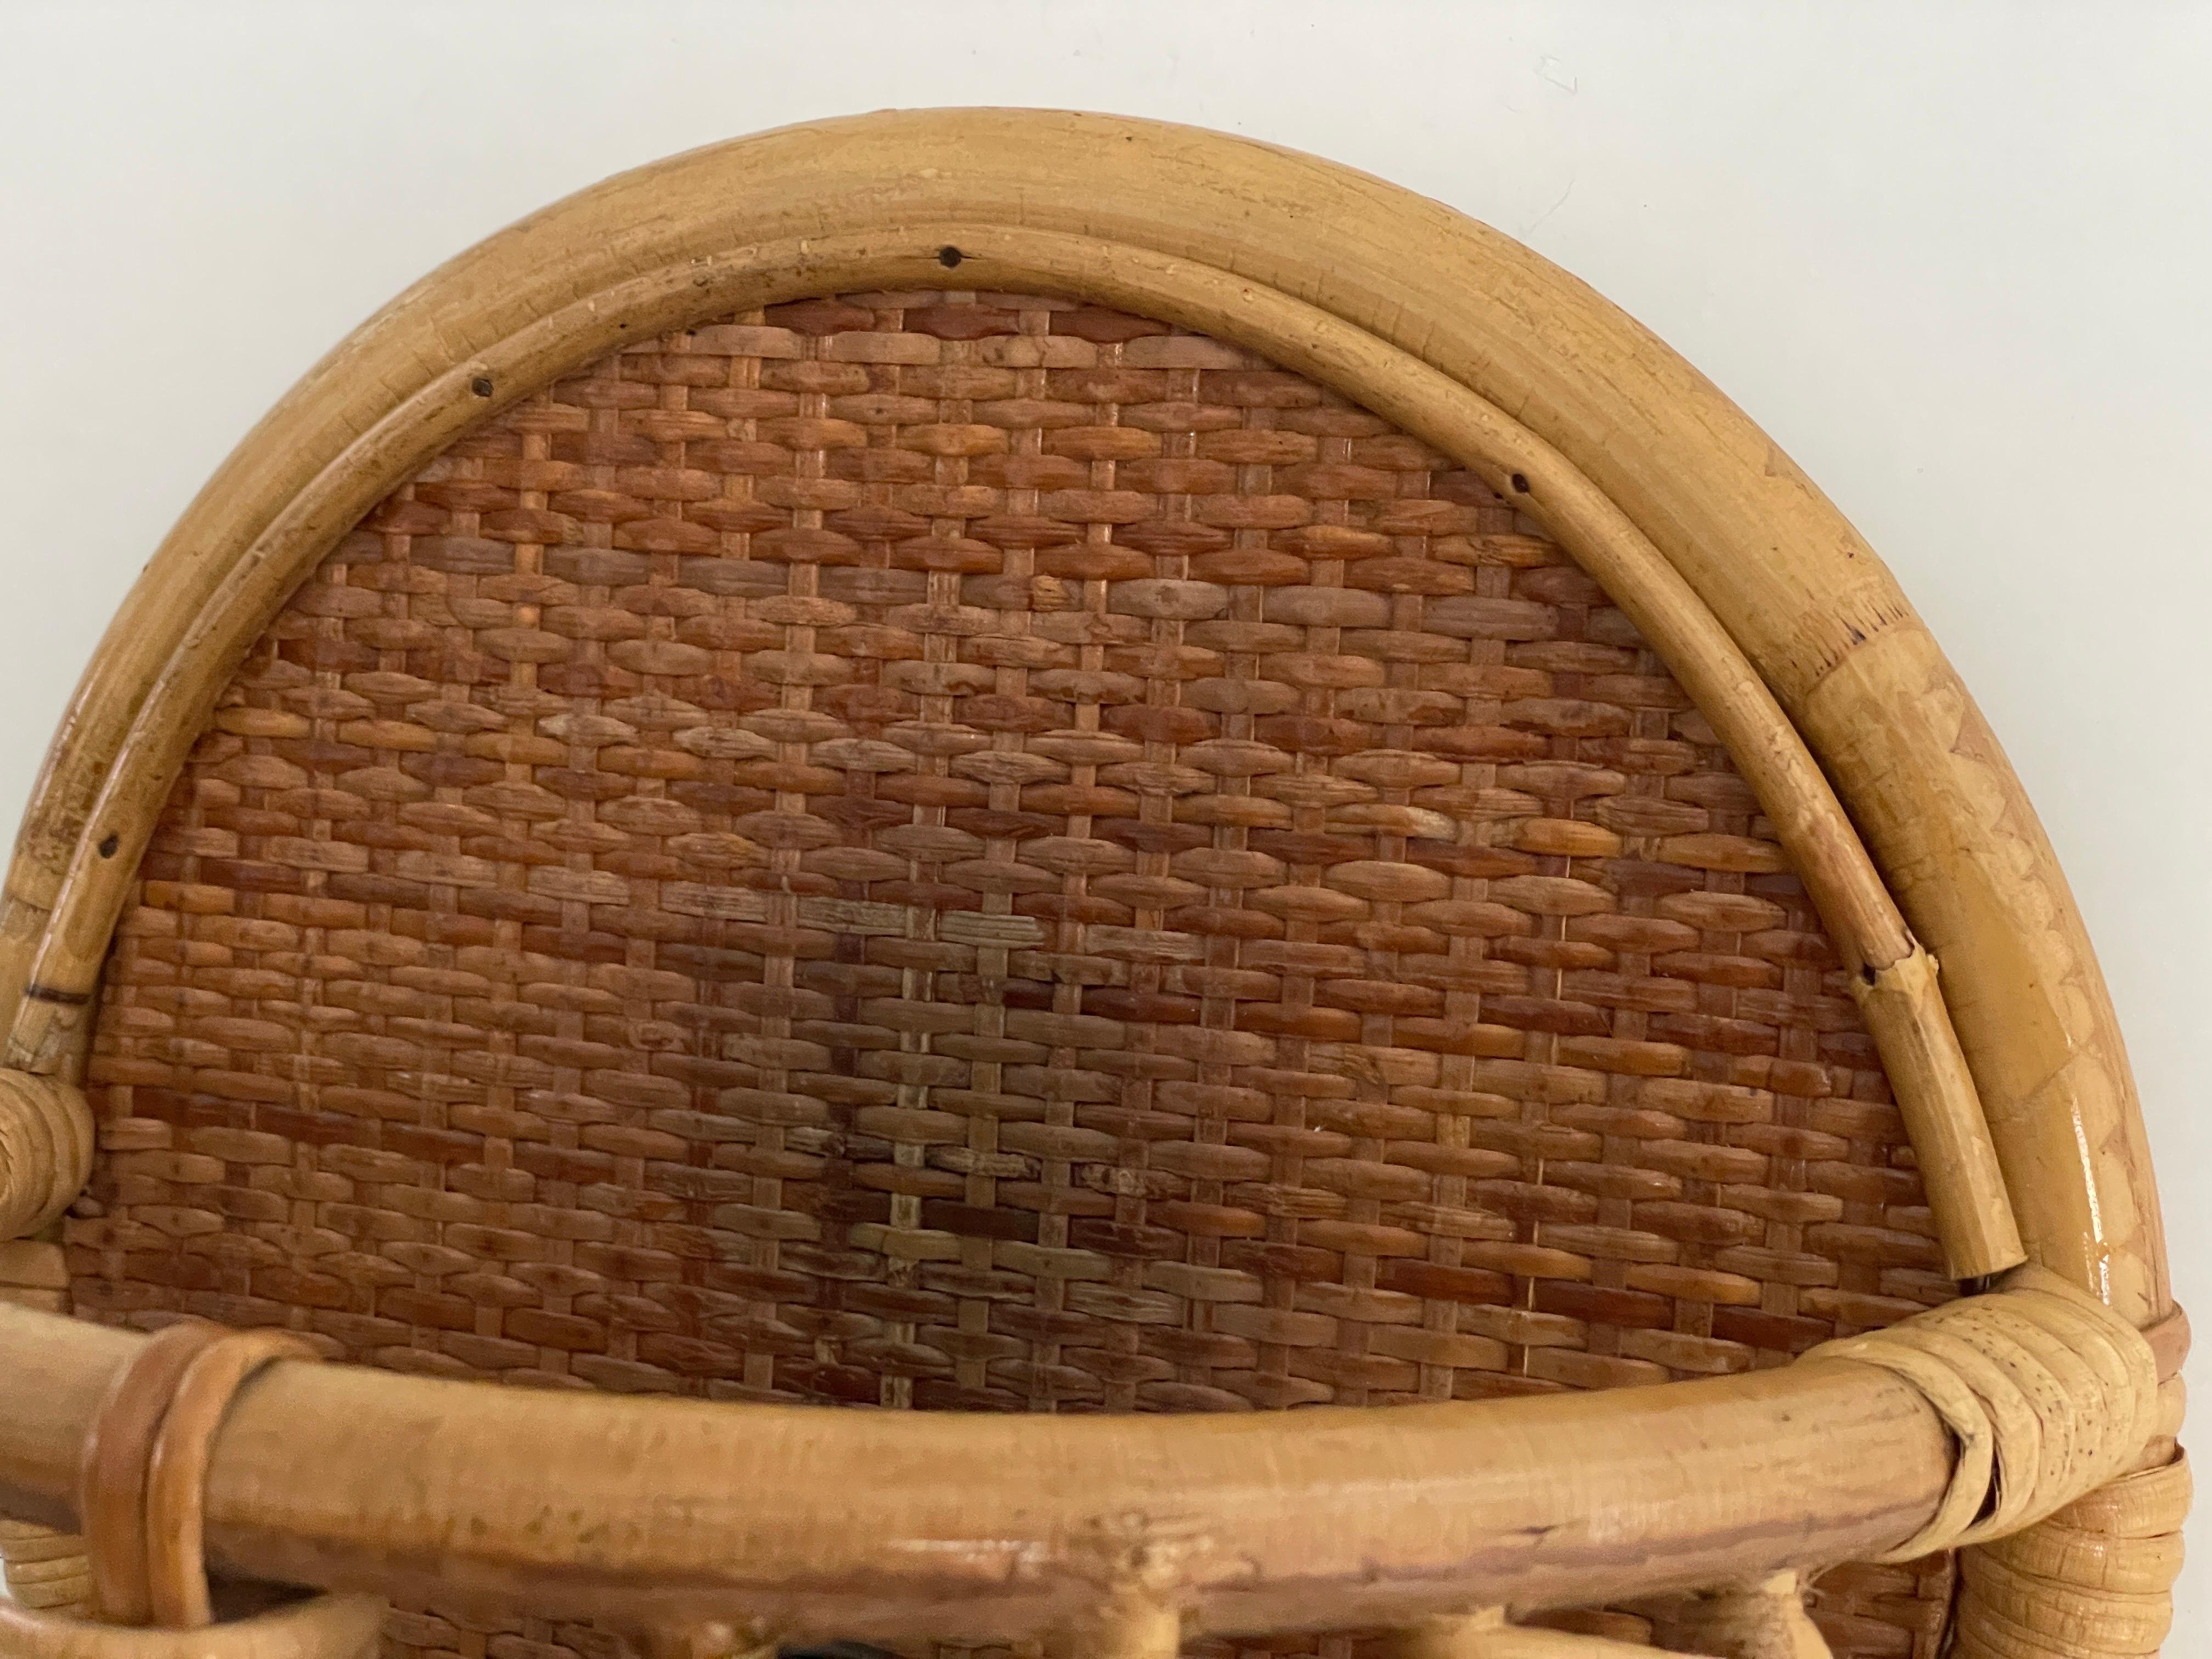 Wicker and Bamboo Round Design Pair of Wall Lamps, 1950s, Italy For Sale 2